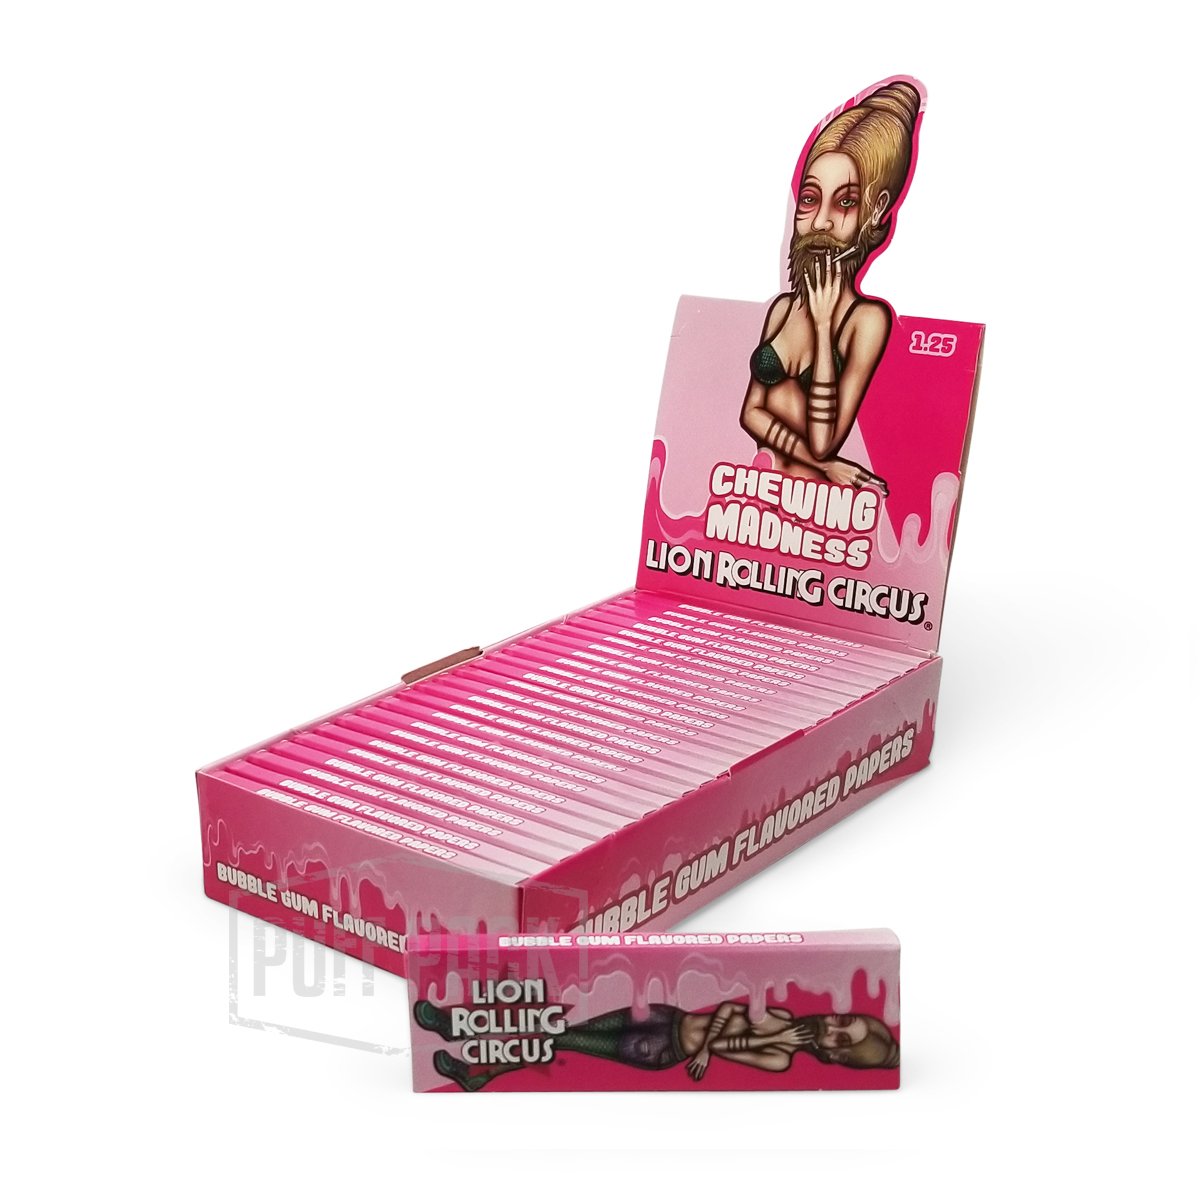 Lion circus flavoured rolling paper standard size